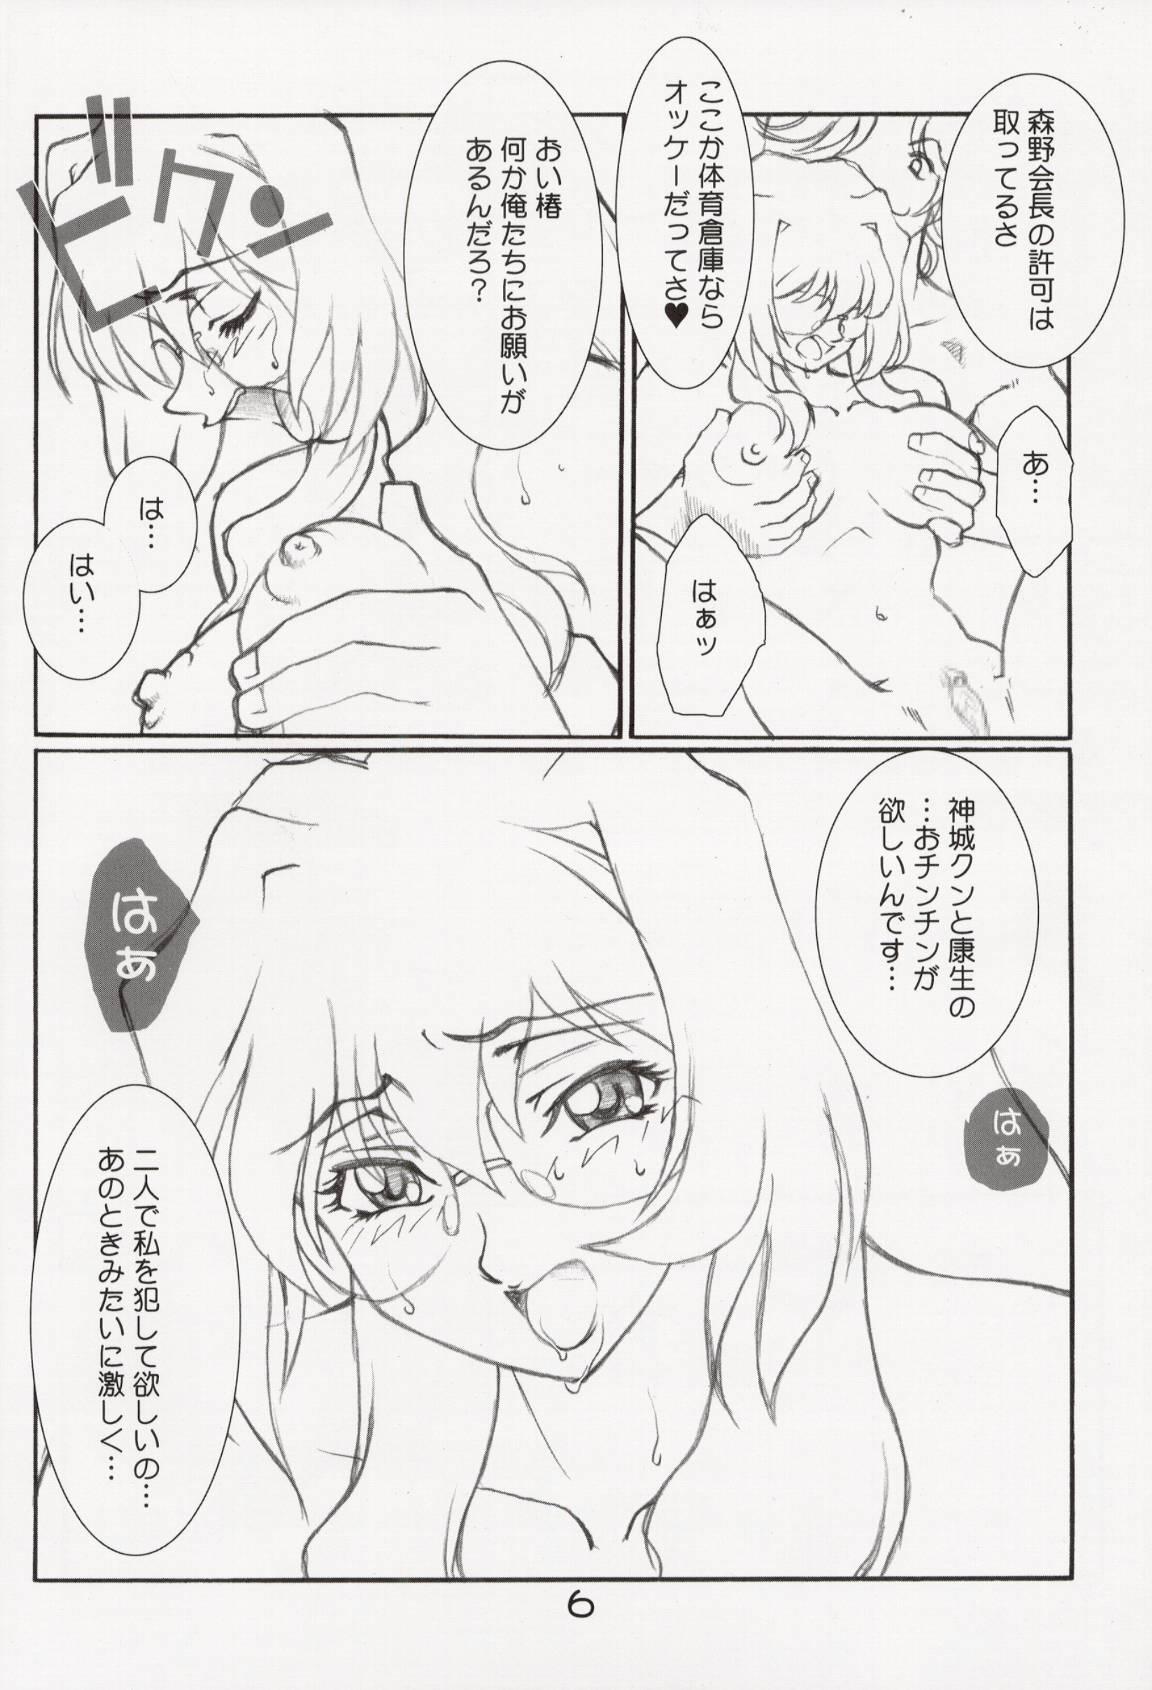 Romantic Sudden Onegai Twins SYNDROME - Onegai twins Pawg - Page 7